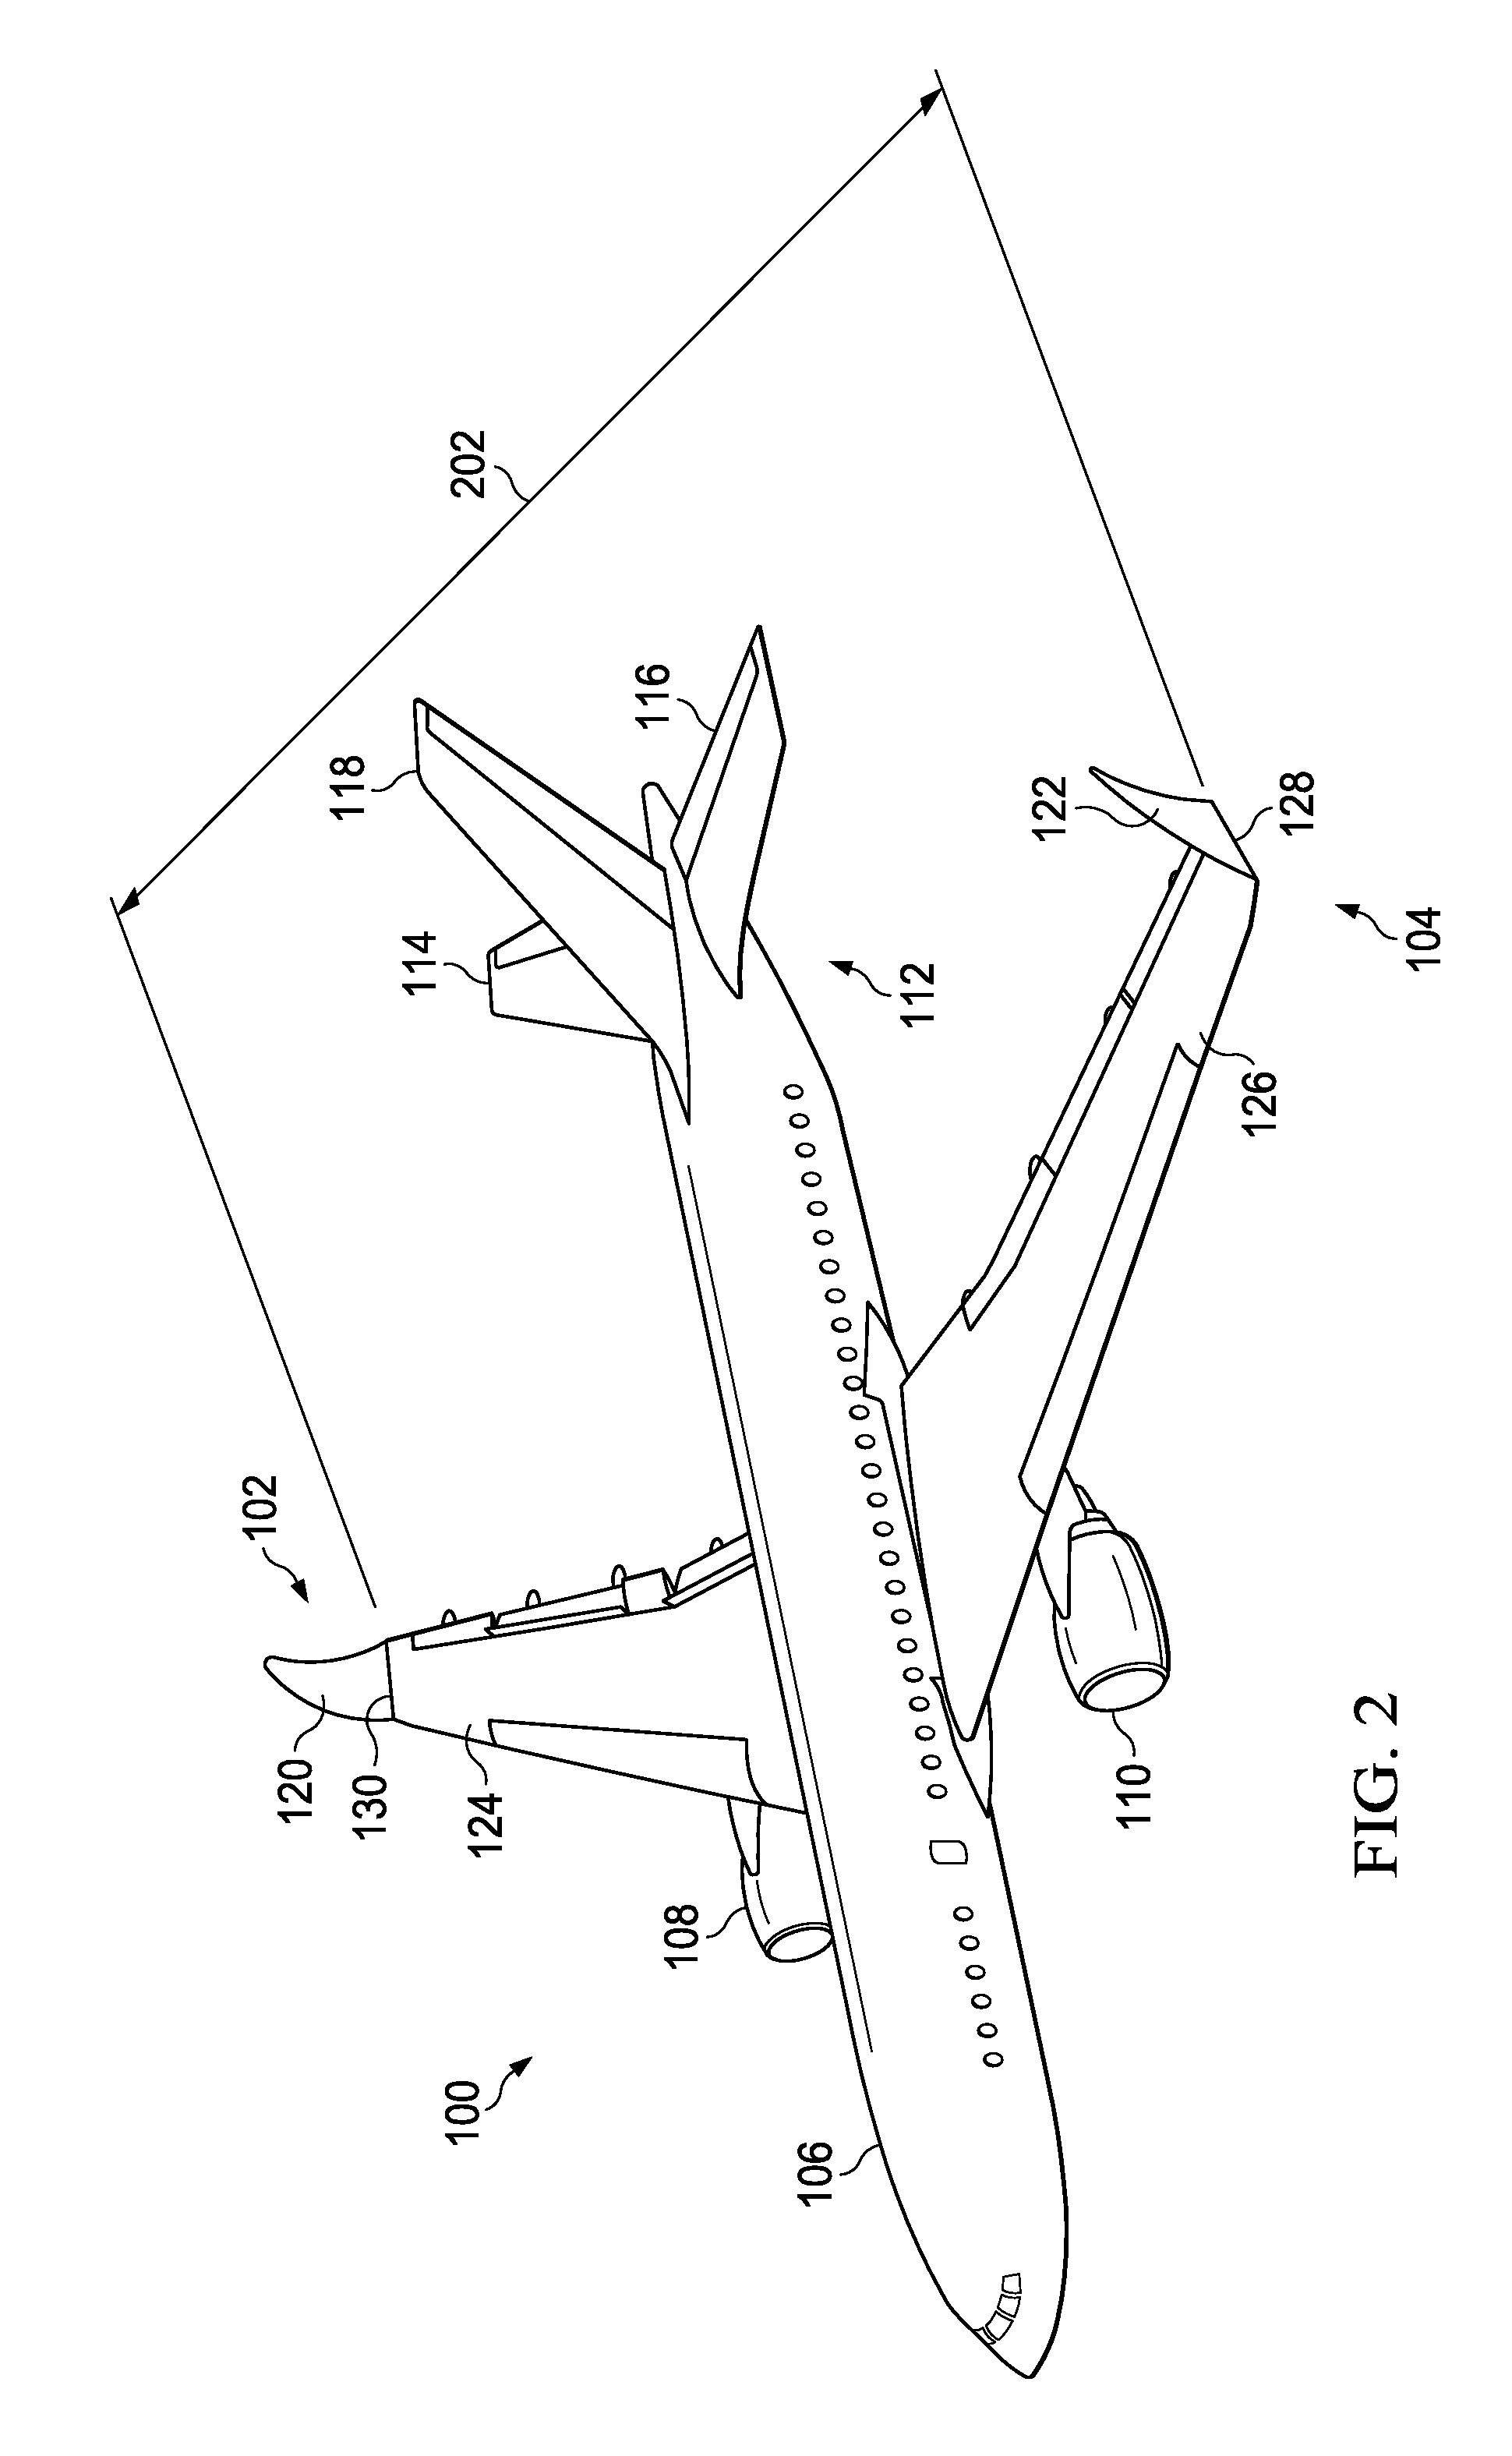 Wing fold controller